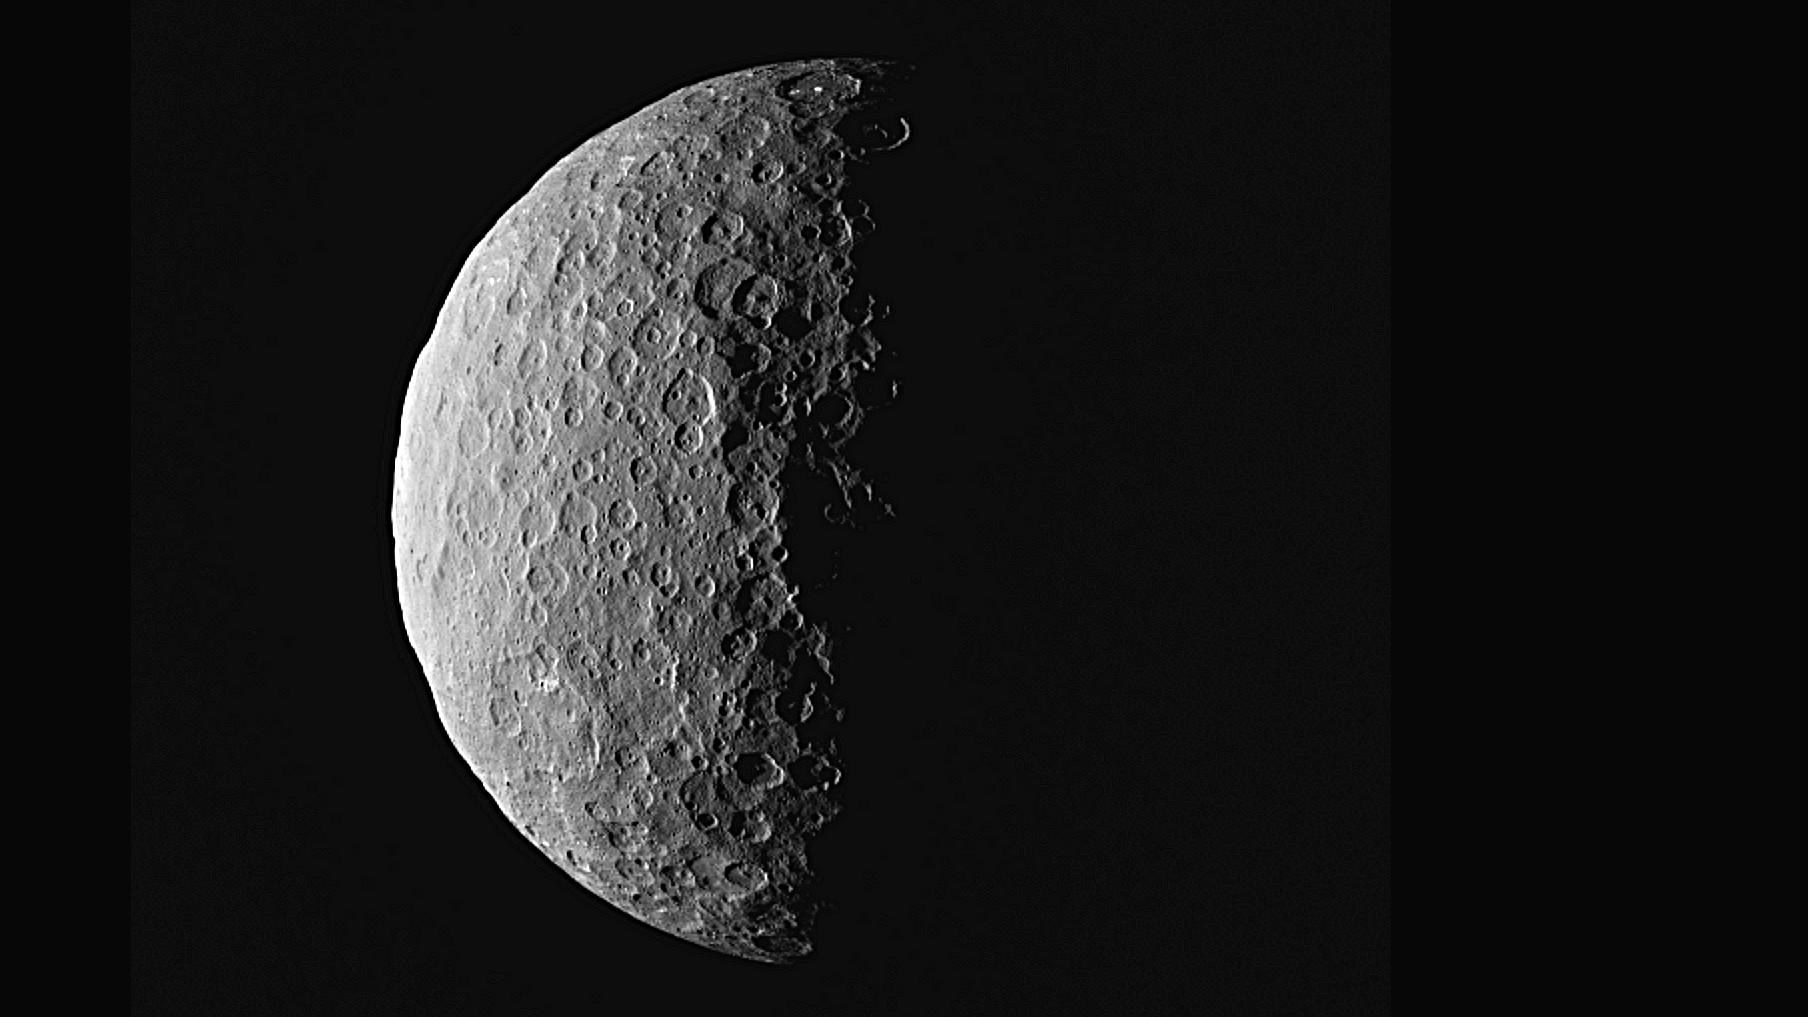 White spots on Ceres